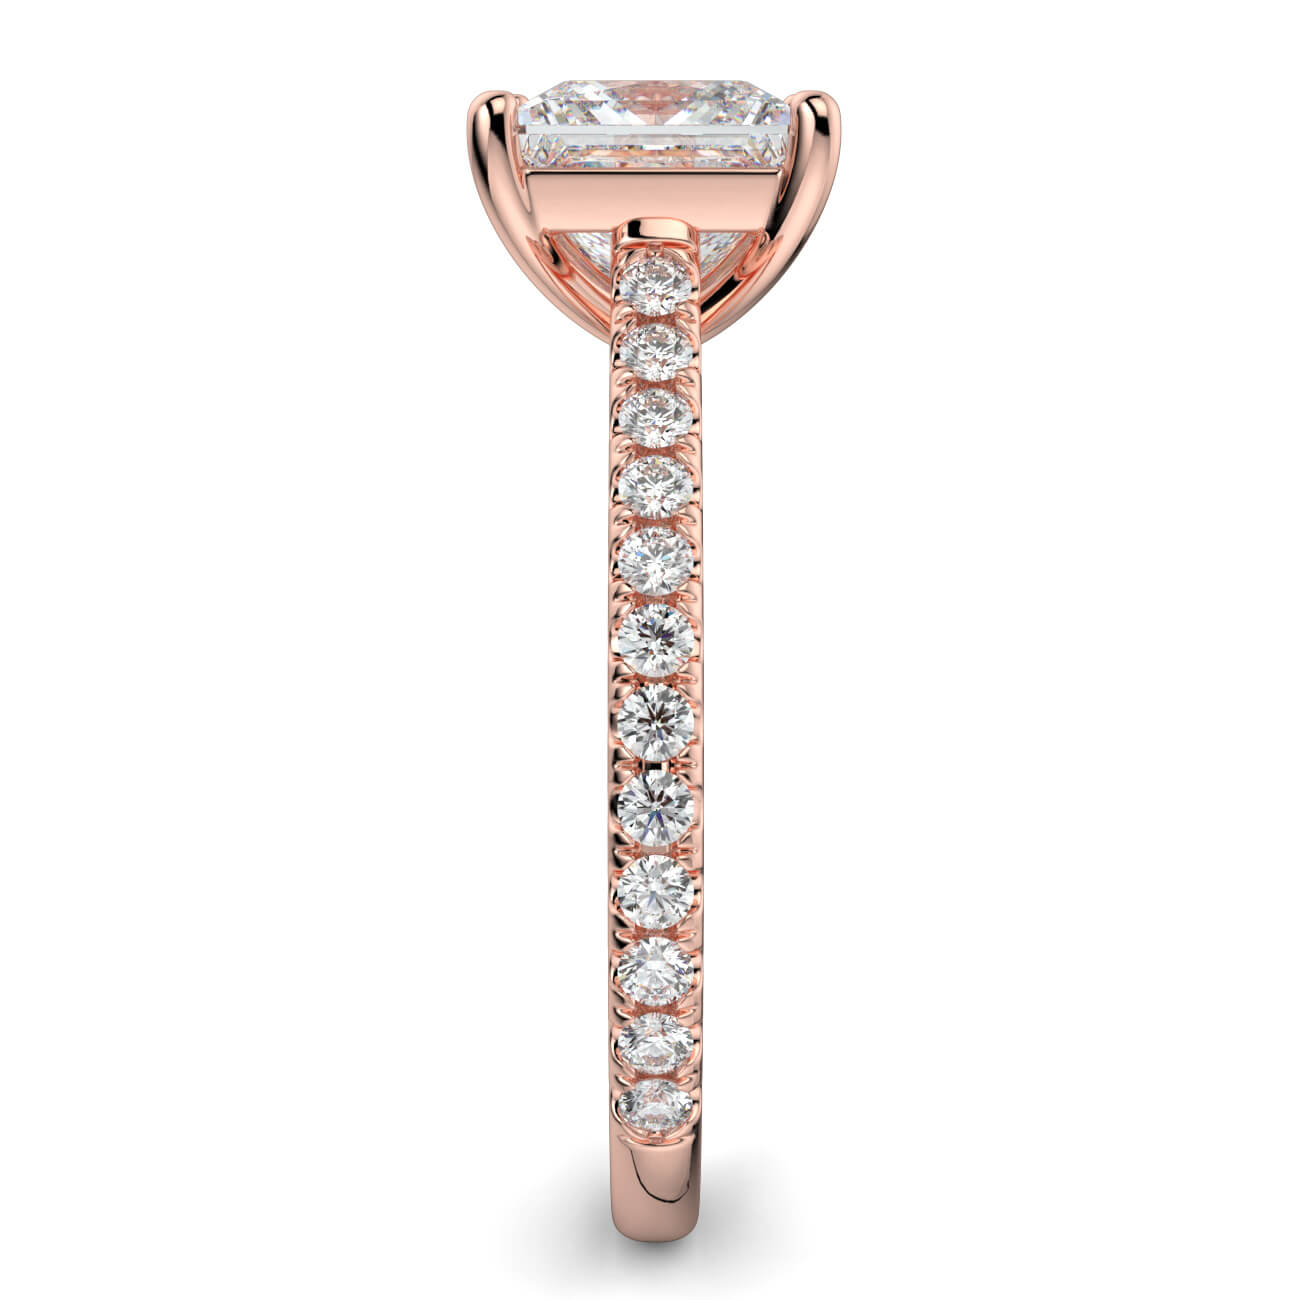 Princess Cut diamond cathedral engagement ring in rose gold – Australian Diamond Network